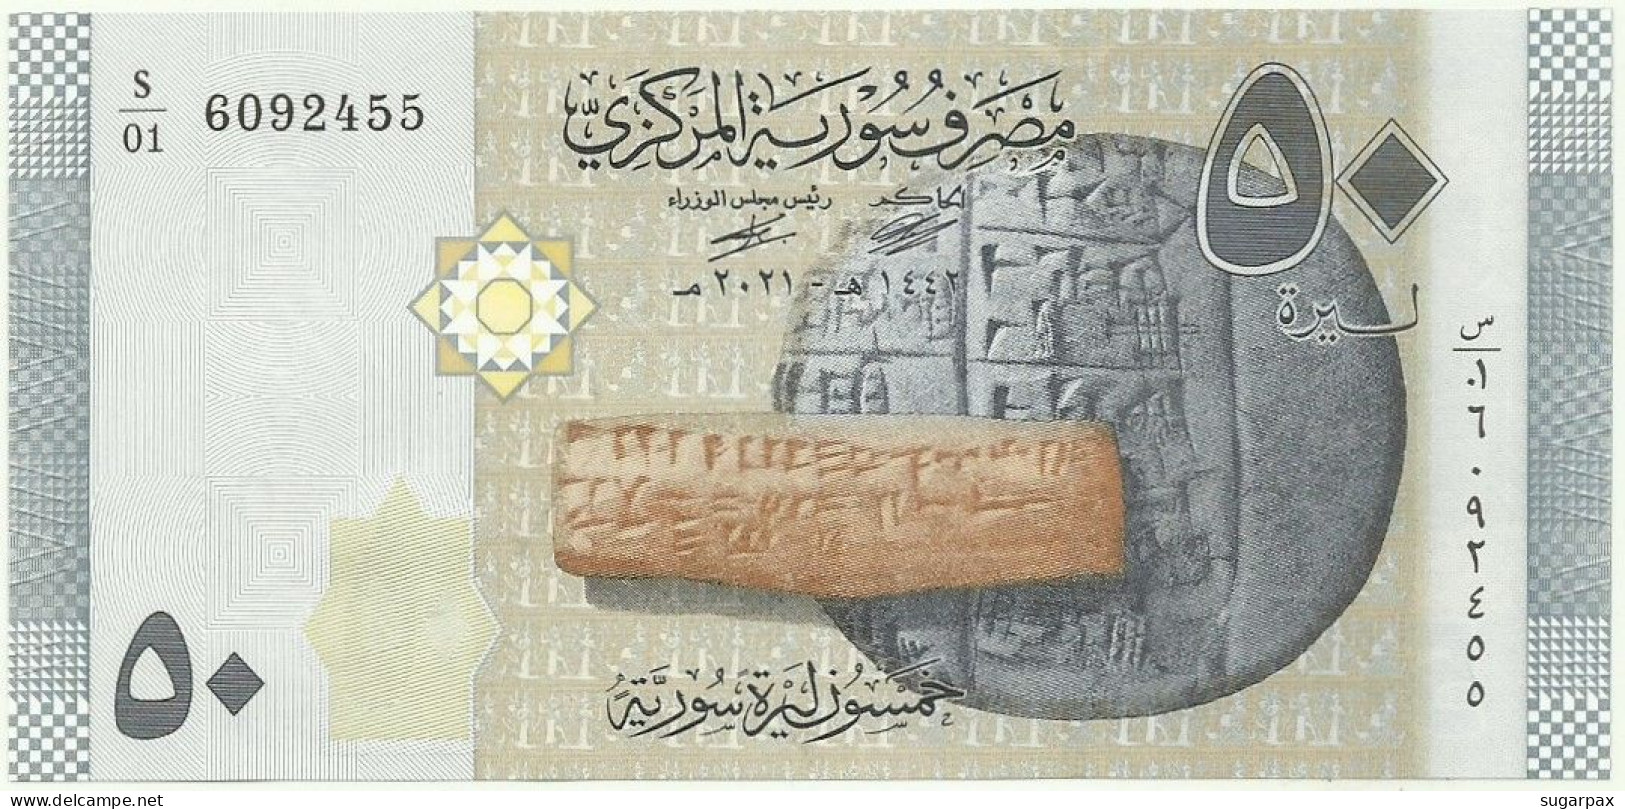 Syria - 50 Syrian Pounds - 2021 / AH 1442 - Pick 112.NEW - Unc. - Serie S/01 - Syria